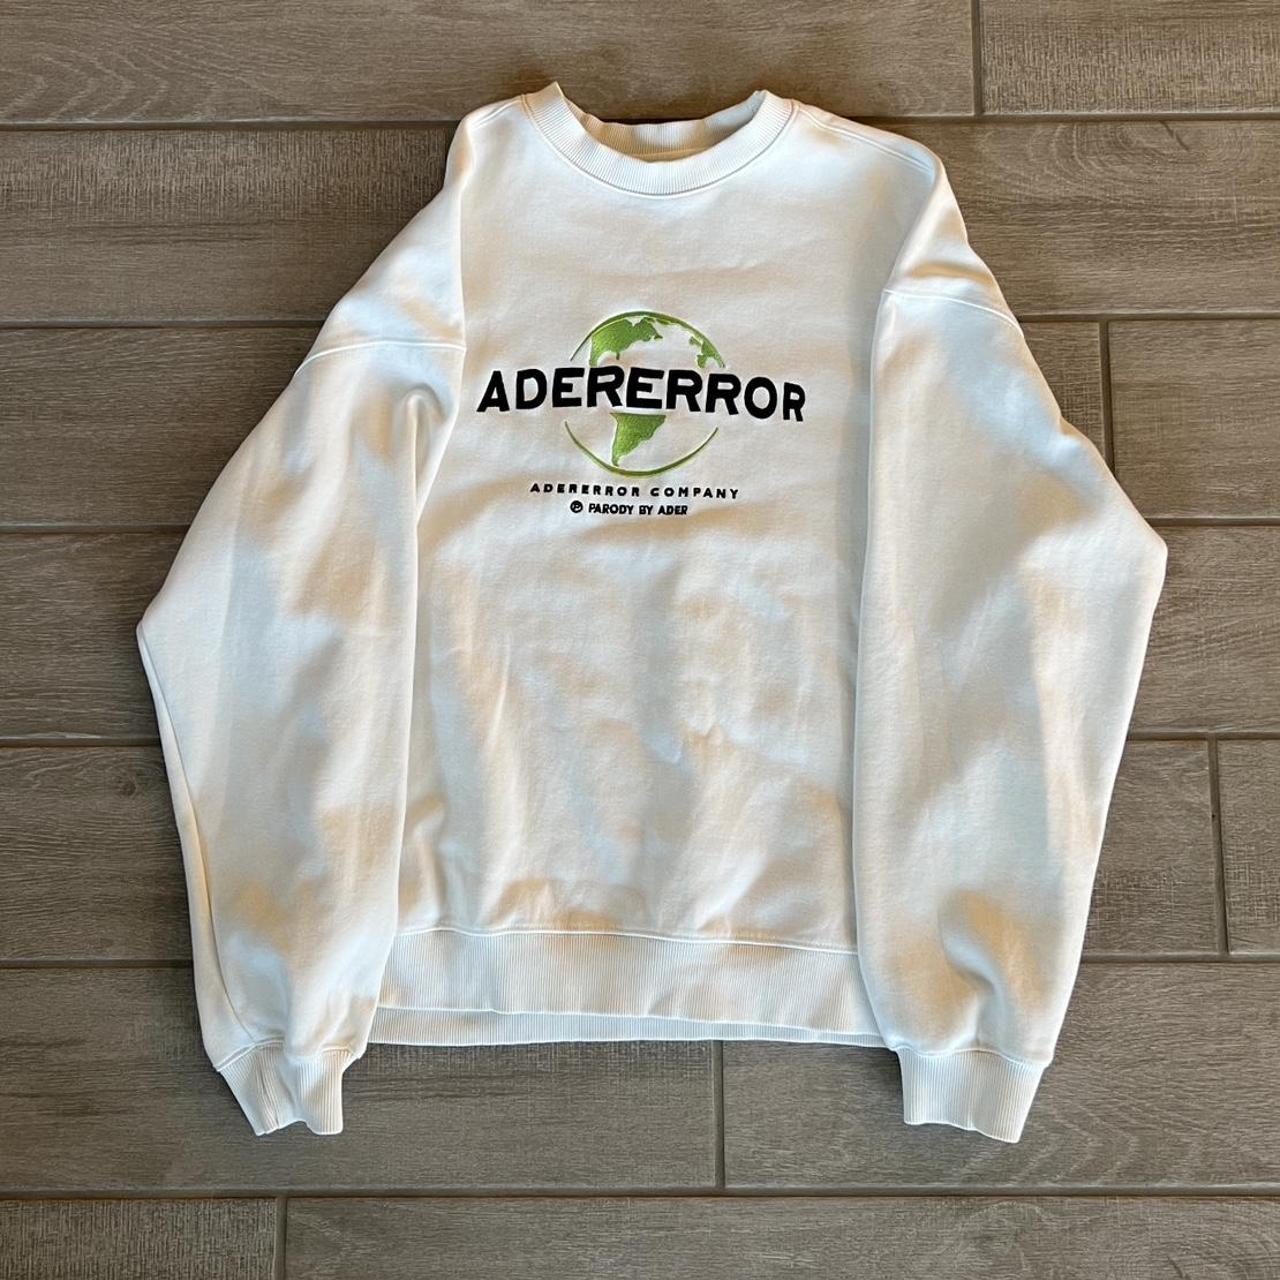 item listed by aygoodinfluence